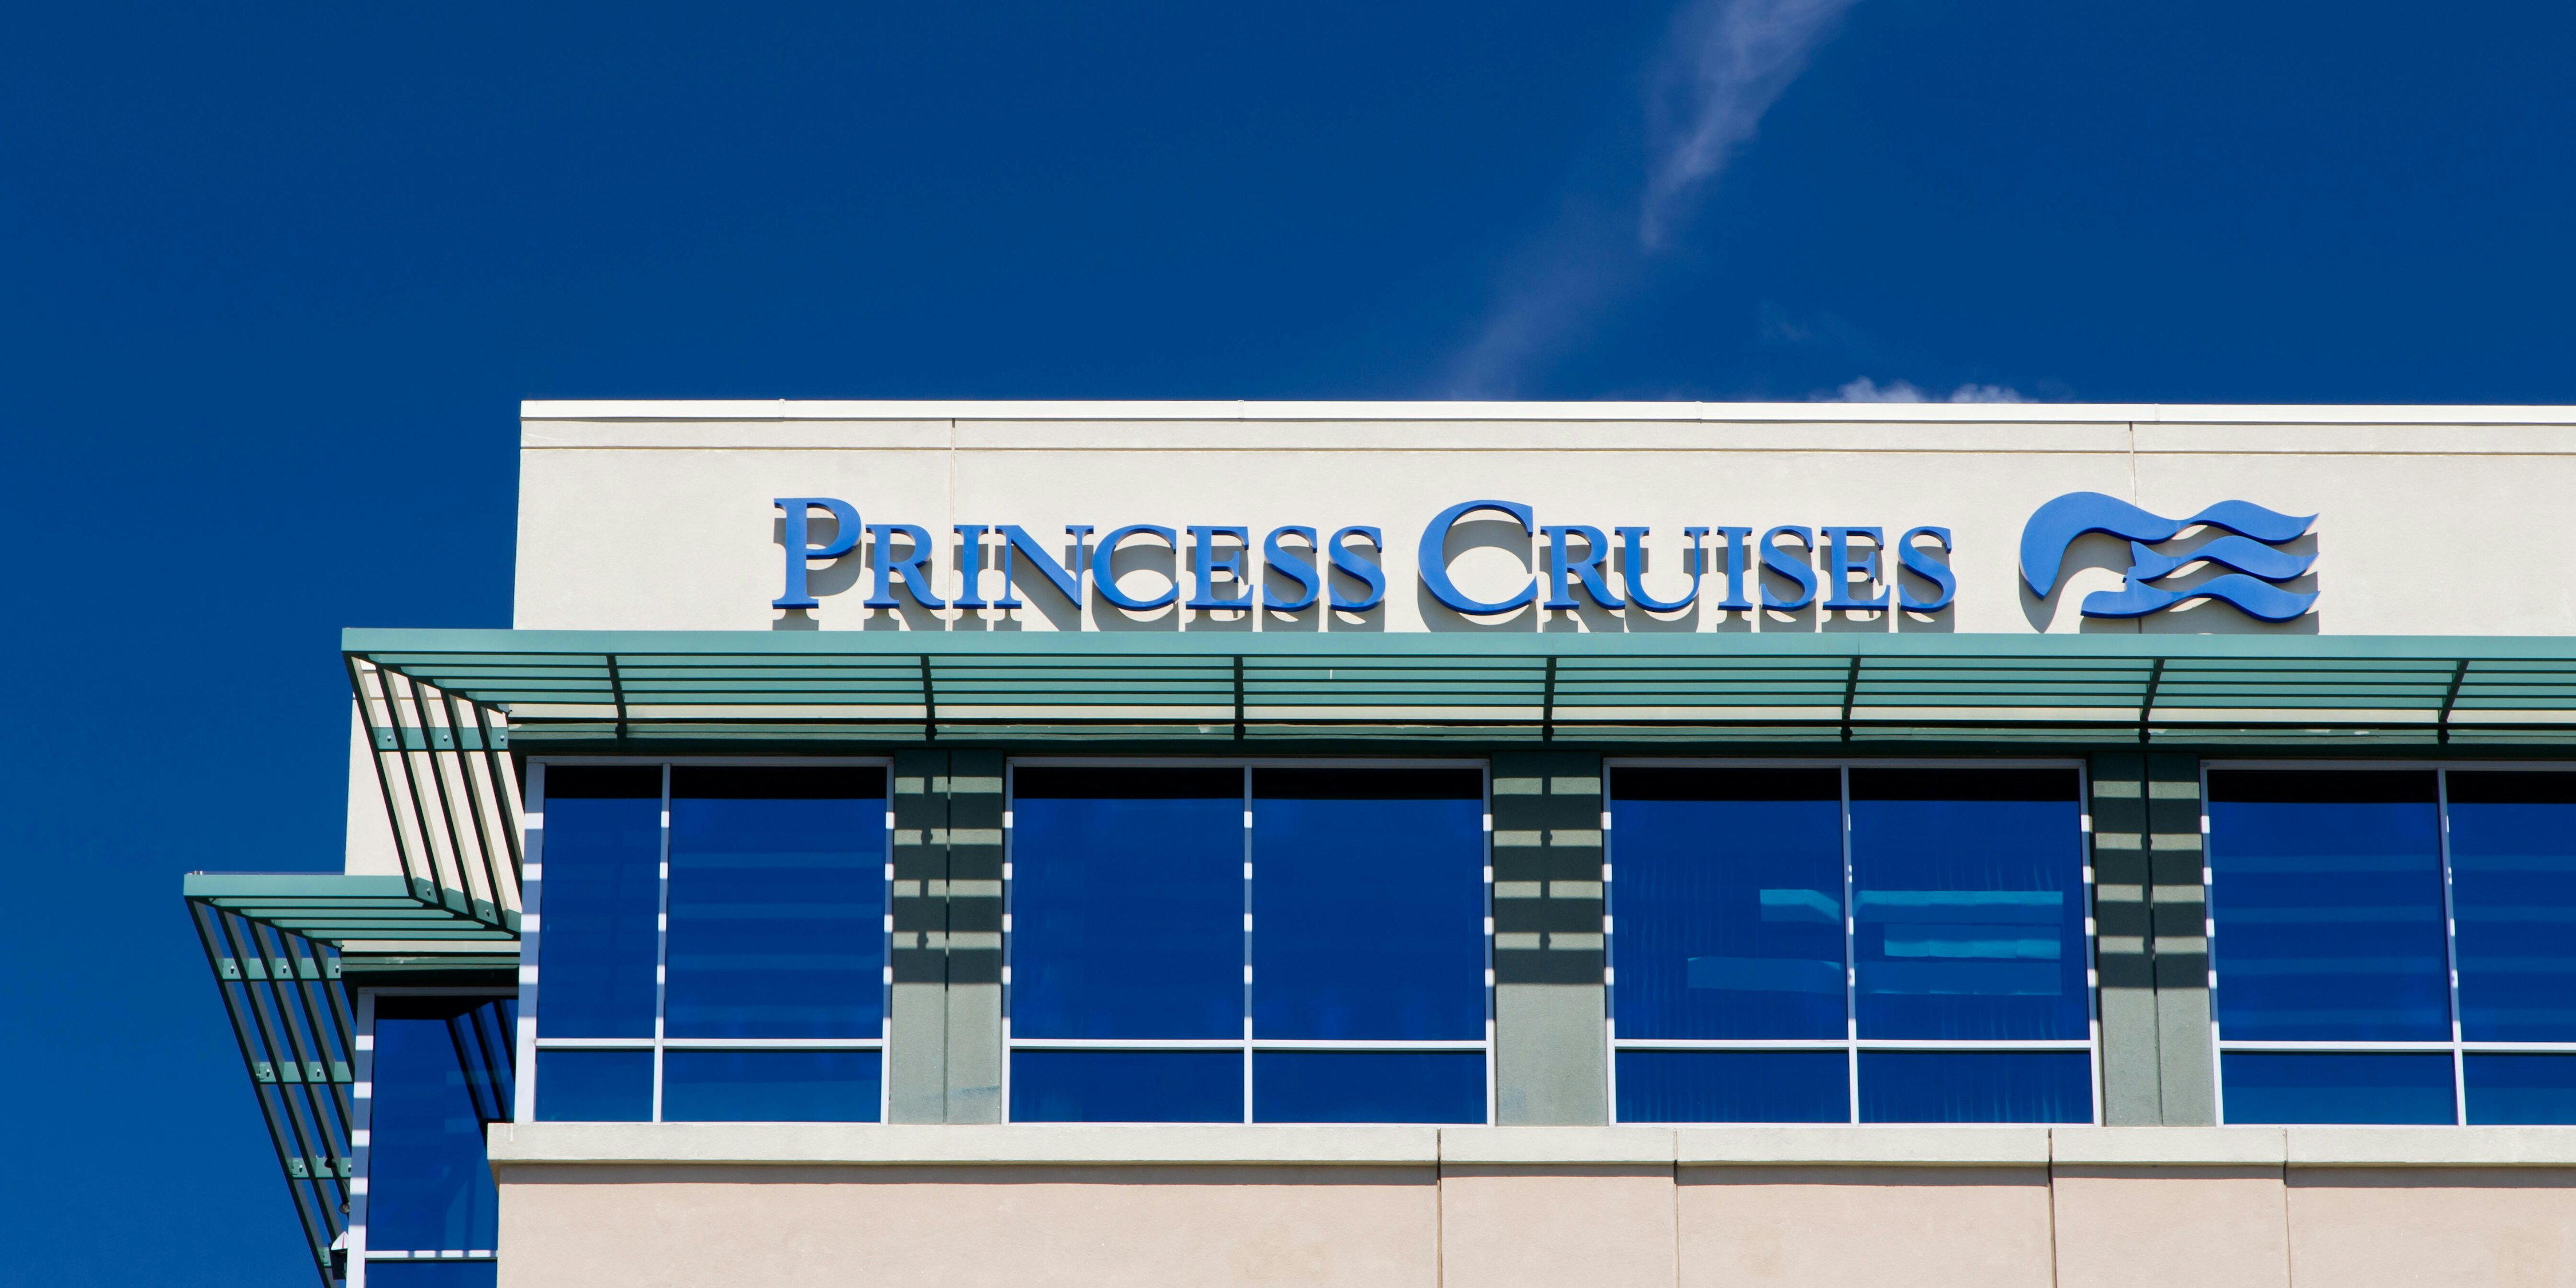 princess cruise lines office